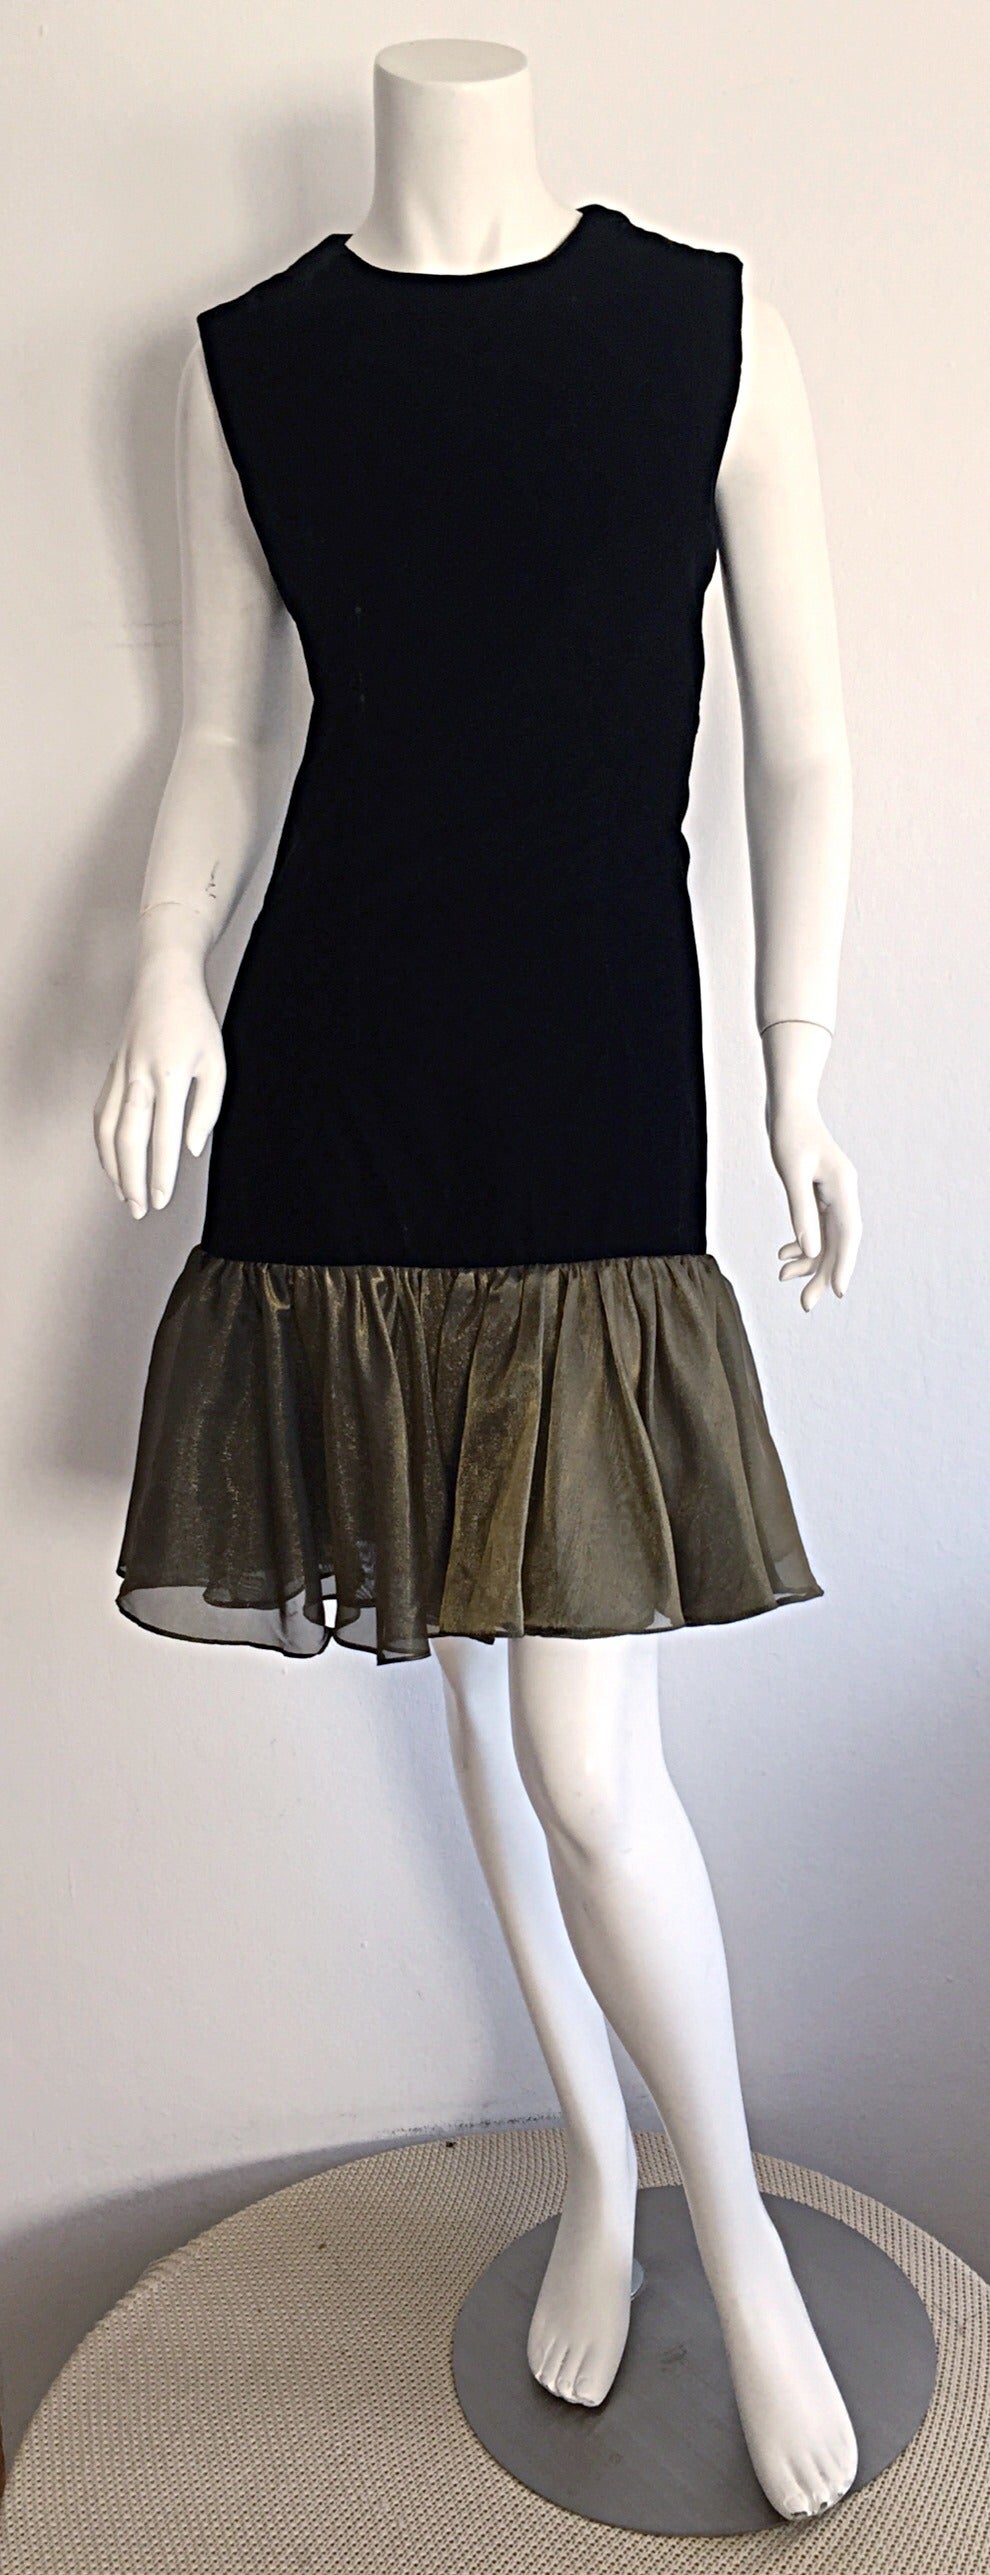 Beautiful vintage Cathy Hardwick black silk velvet dress! Drop-waist style, with wonderful bronze/gold hem. Also looks great belted. Fully lined. In great condition. Approximately Size Medium 

Measurements: 
36 inch bust
28 inch waist
36 inch